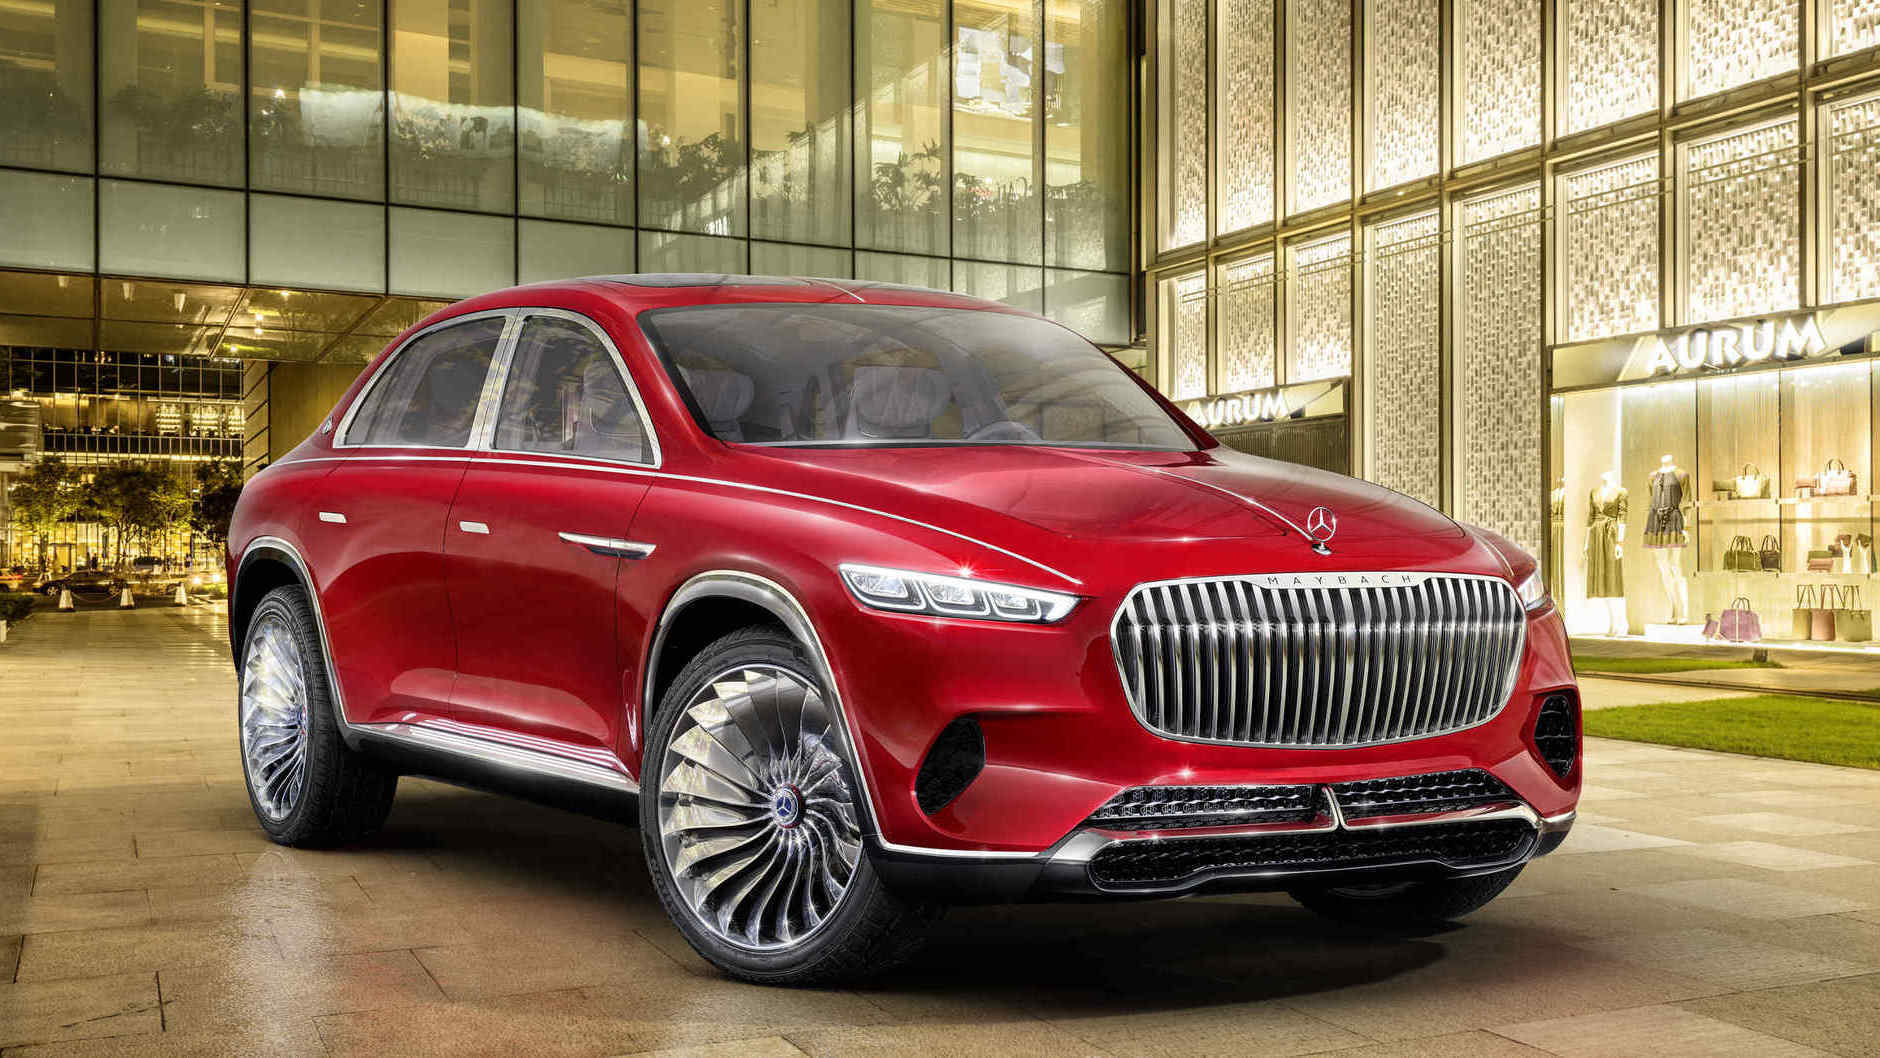 The Mercedes Maybach Ultimate Luxury SUV Is So Ugly It Actually